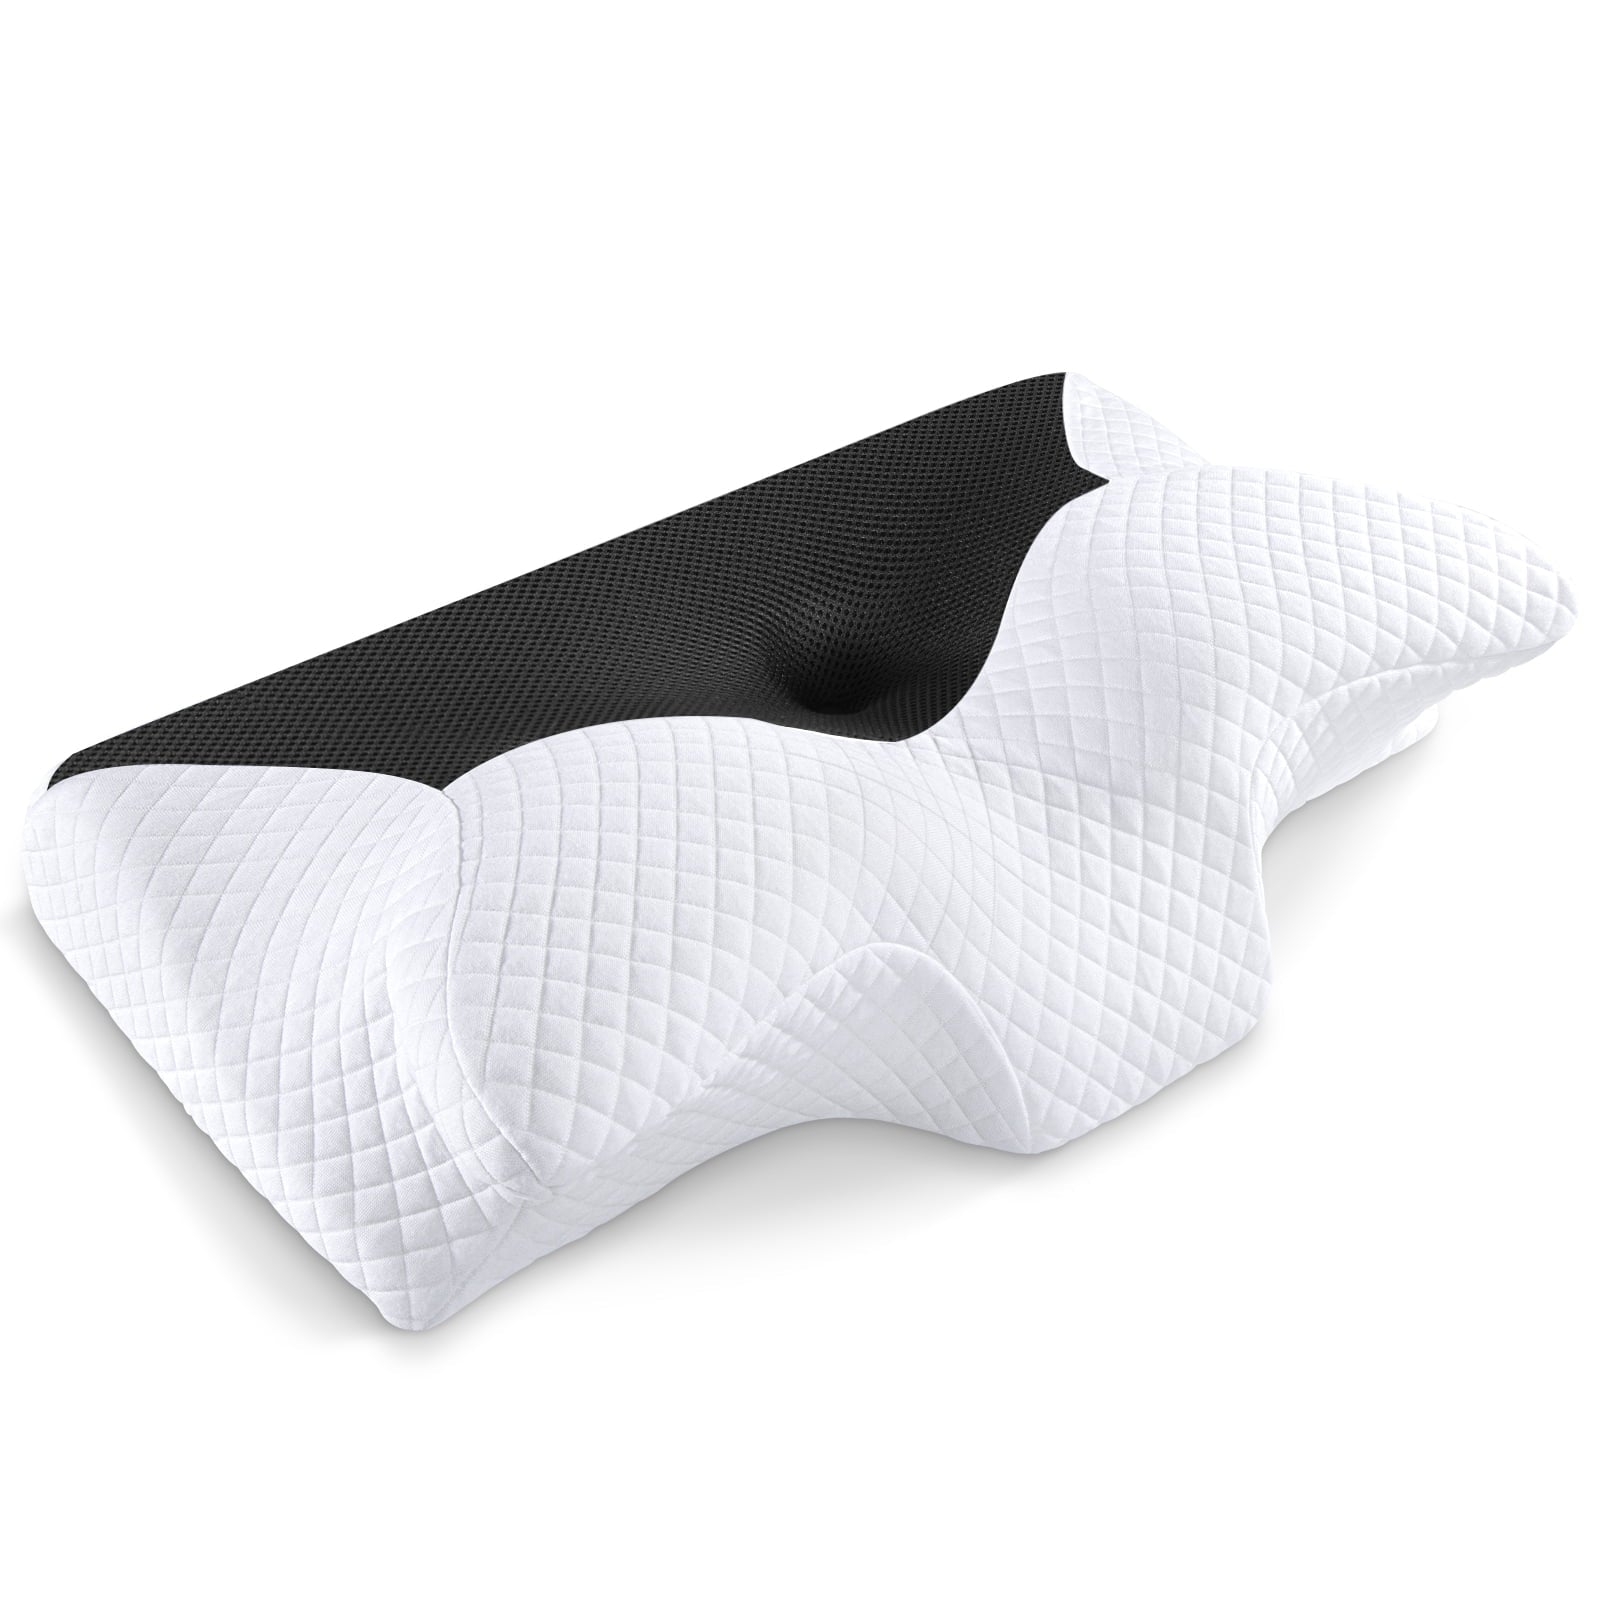 HOMCA Cervical Memory Foam Pillow Black 24in for Pain Relief Contoured Support Pillows for All Sleepers(Black)